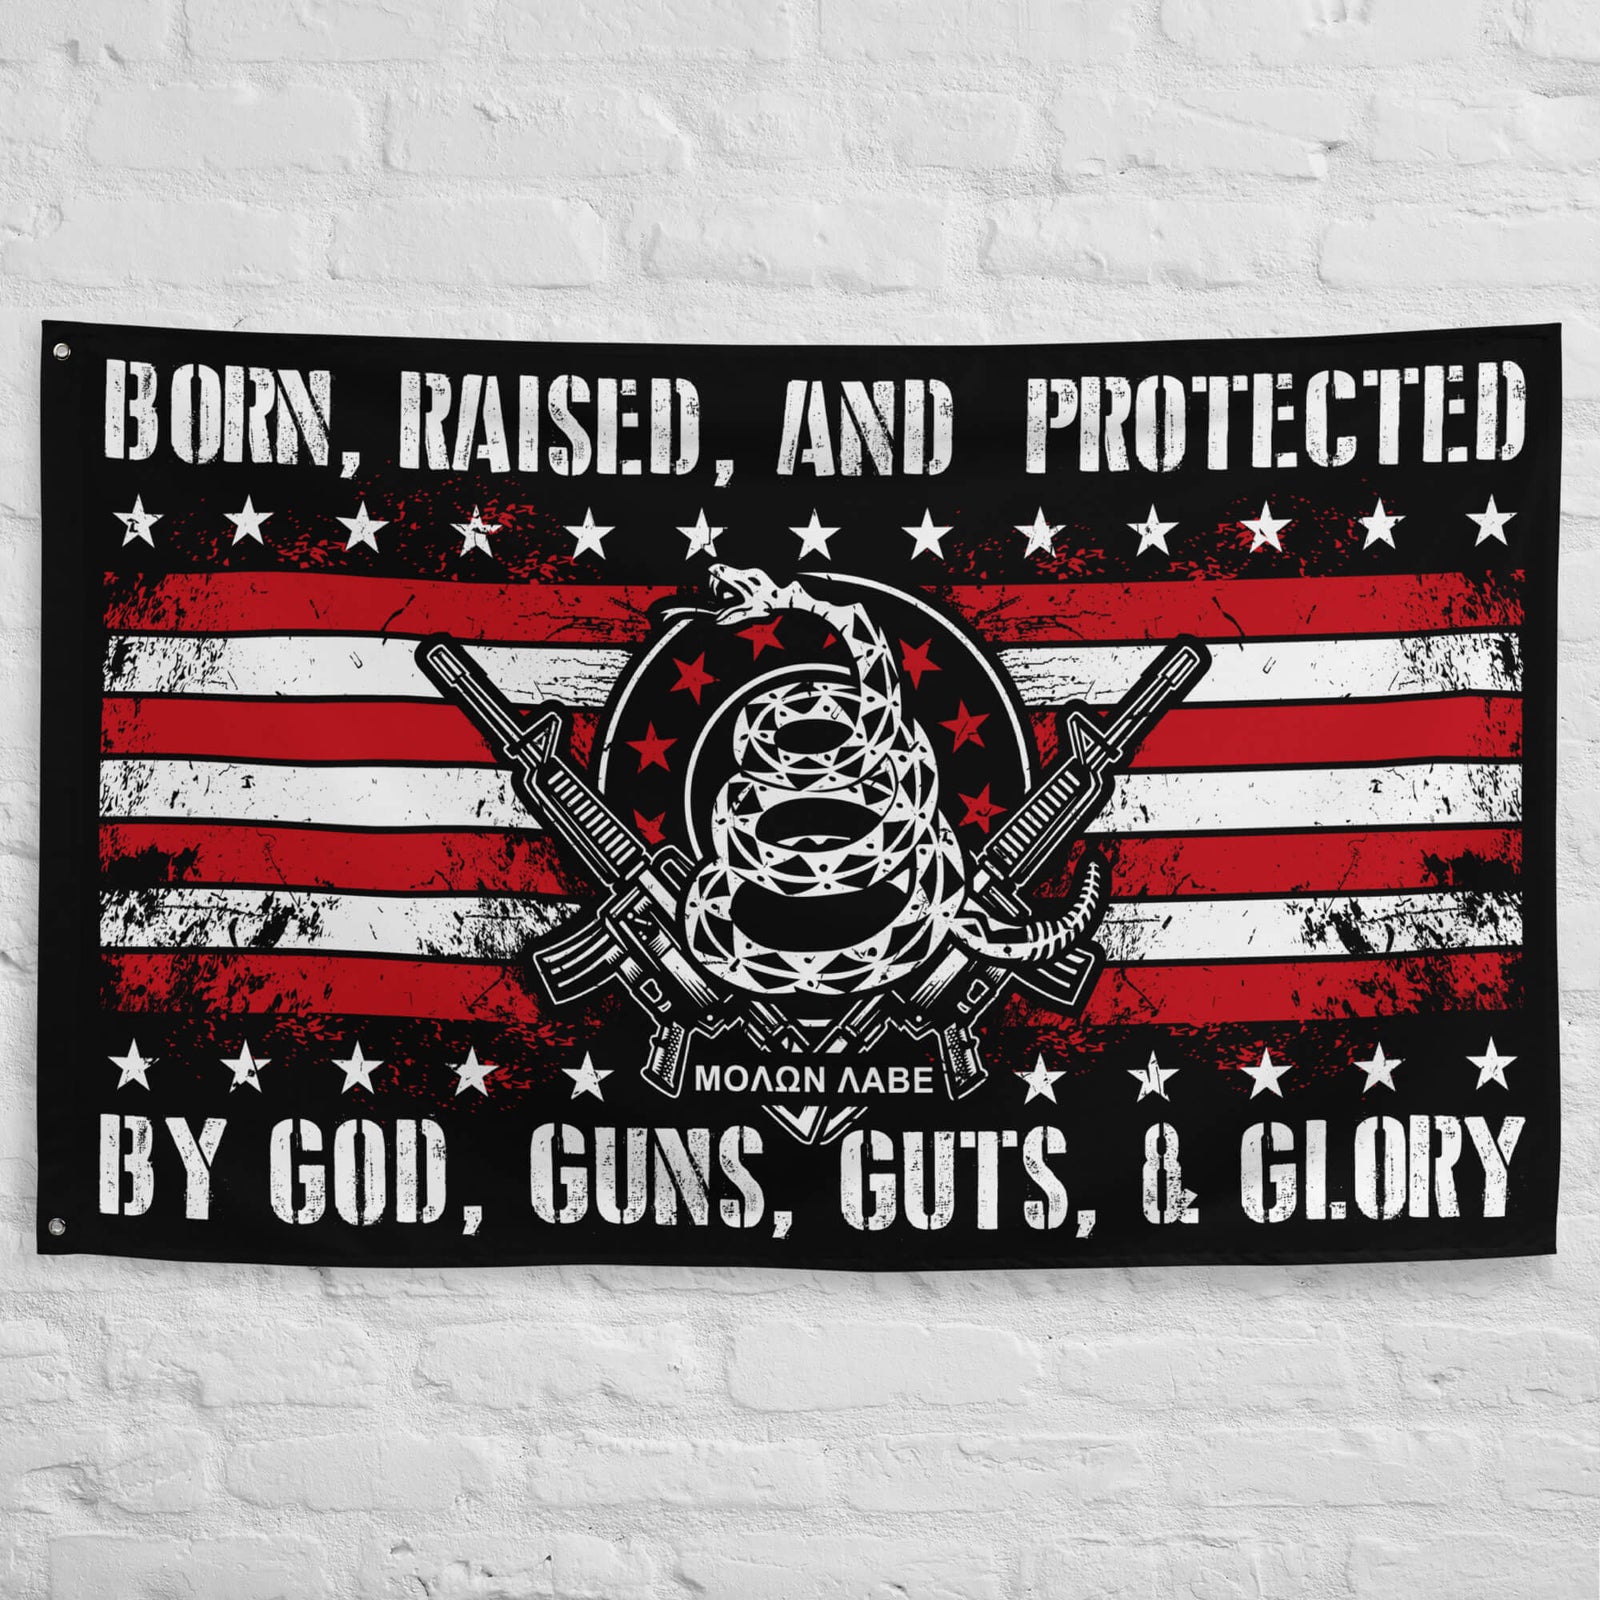 Protected by God, Guns, Guts & Glory! (Flag)